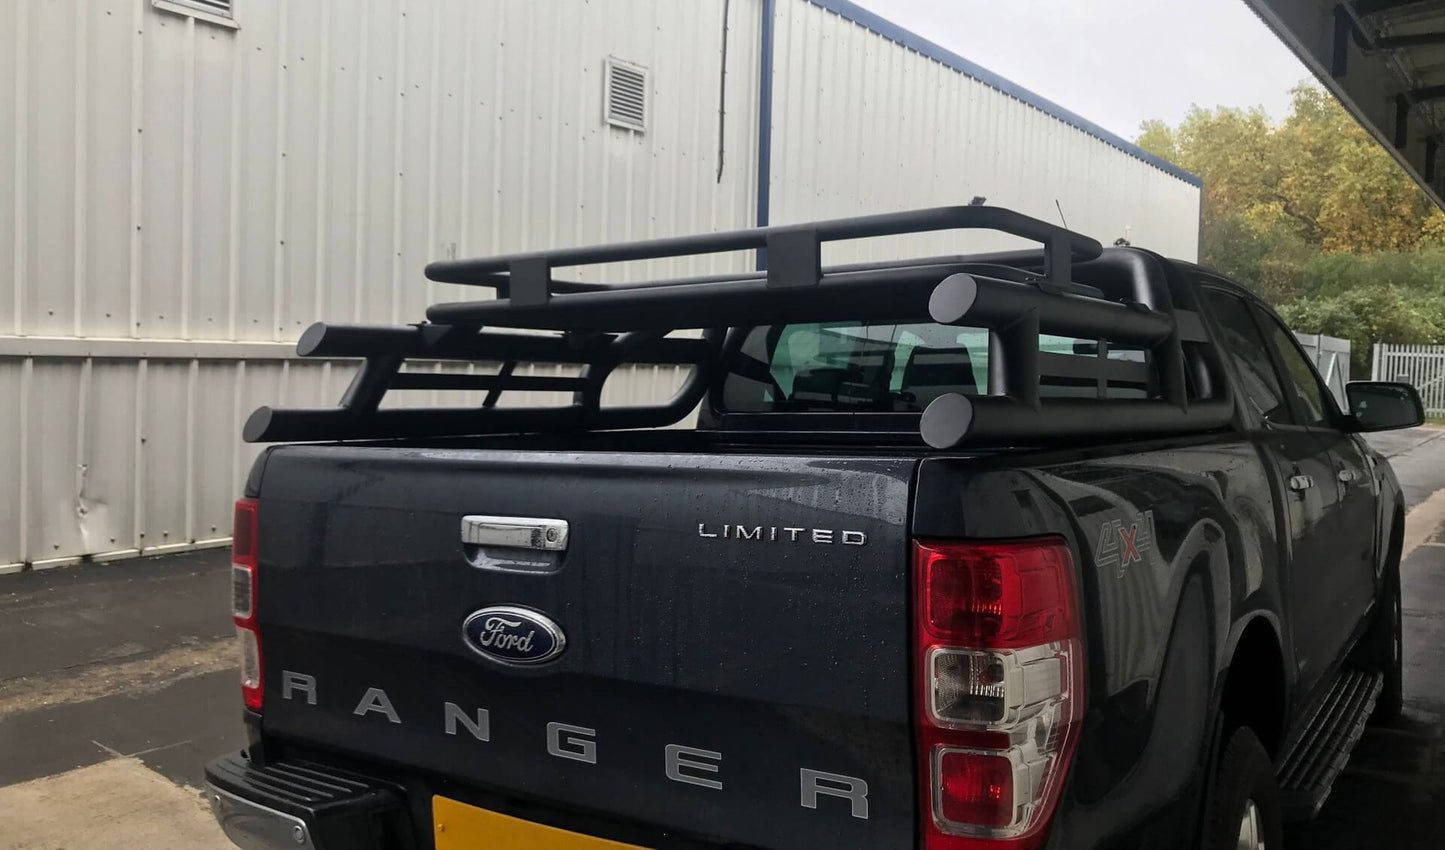 Black SUS201 Long Arm Roll Bar with Cargo Basket Rack for the Ford Ranger 2012+